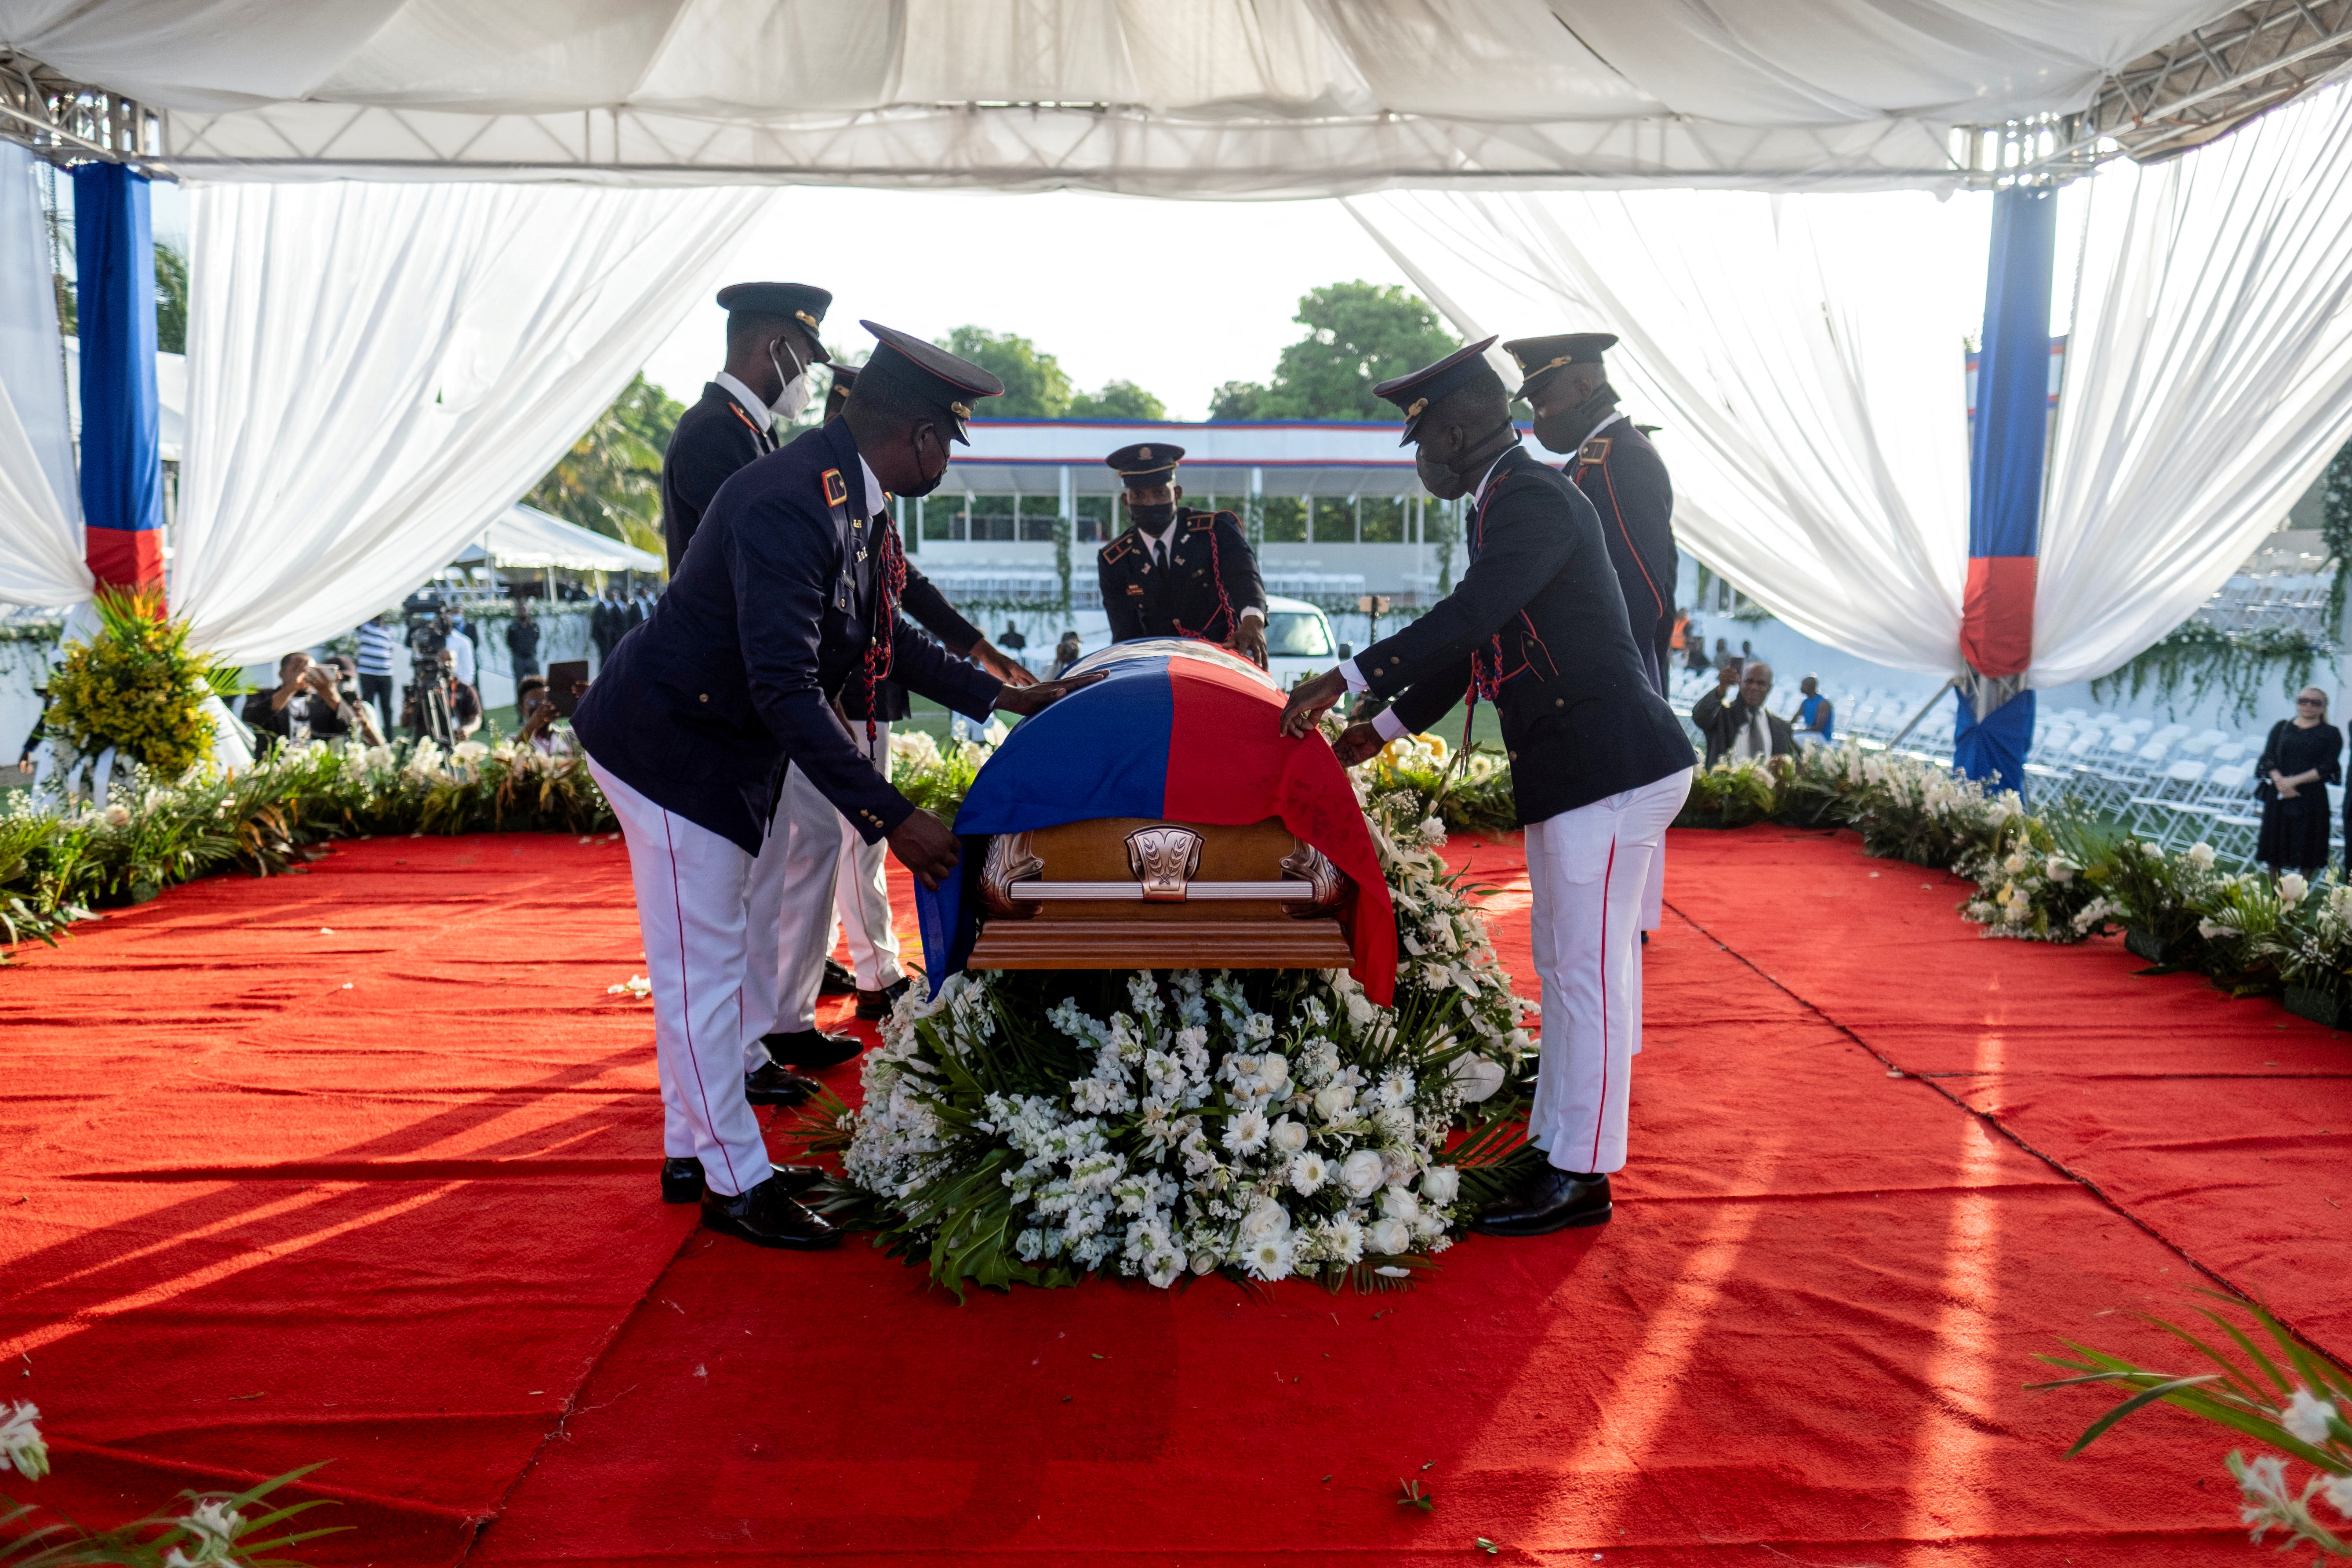 FILE PHOTO: Presidential honor guards place a national flag on the coffin of late Haitian President Jovenel Moise, who was shot dead earlier this month, during his funeral at his family's home in Cap Haitien, Haiti, on July 23, 2021. REUTERS/Ricardo Arduengo/File photo